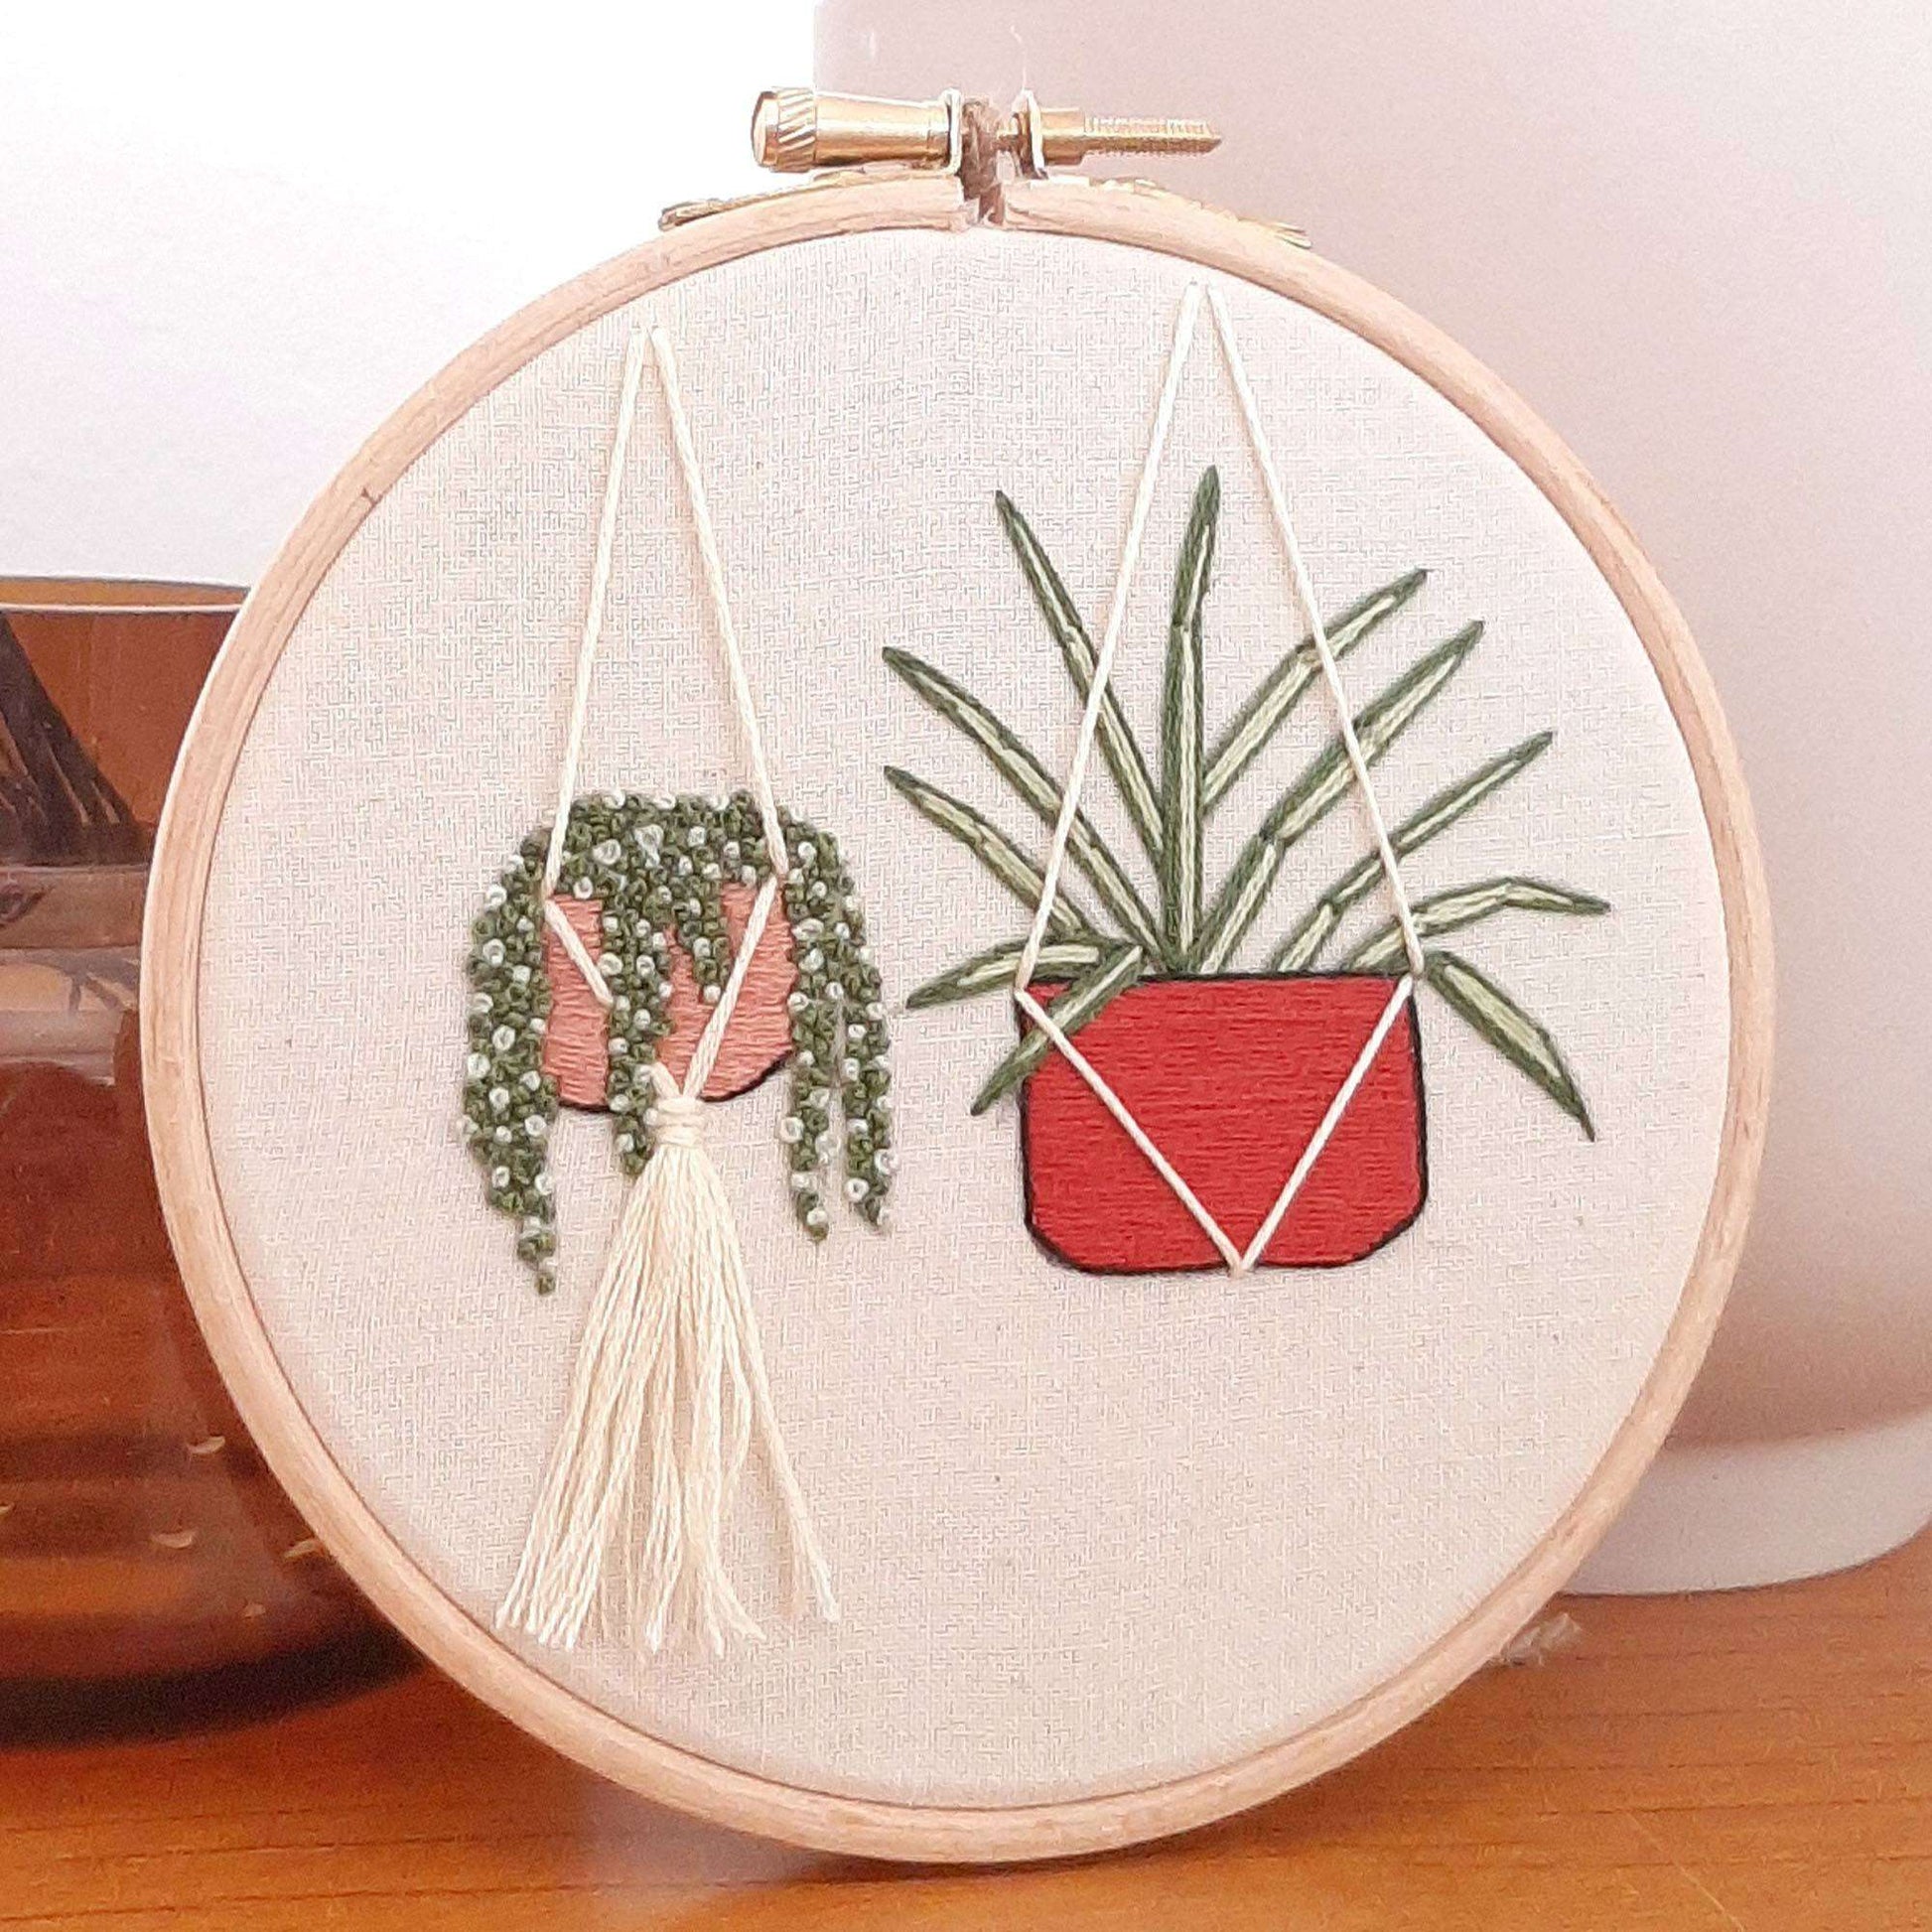 Free Anchor Embroidery Macrame Hanging Plants Embroidered Design Pattern